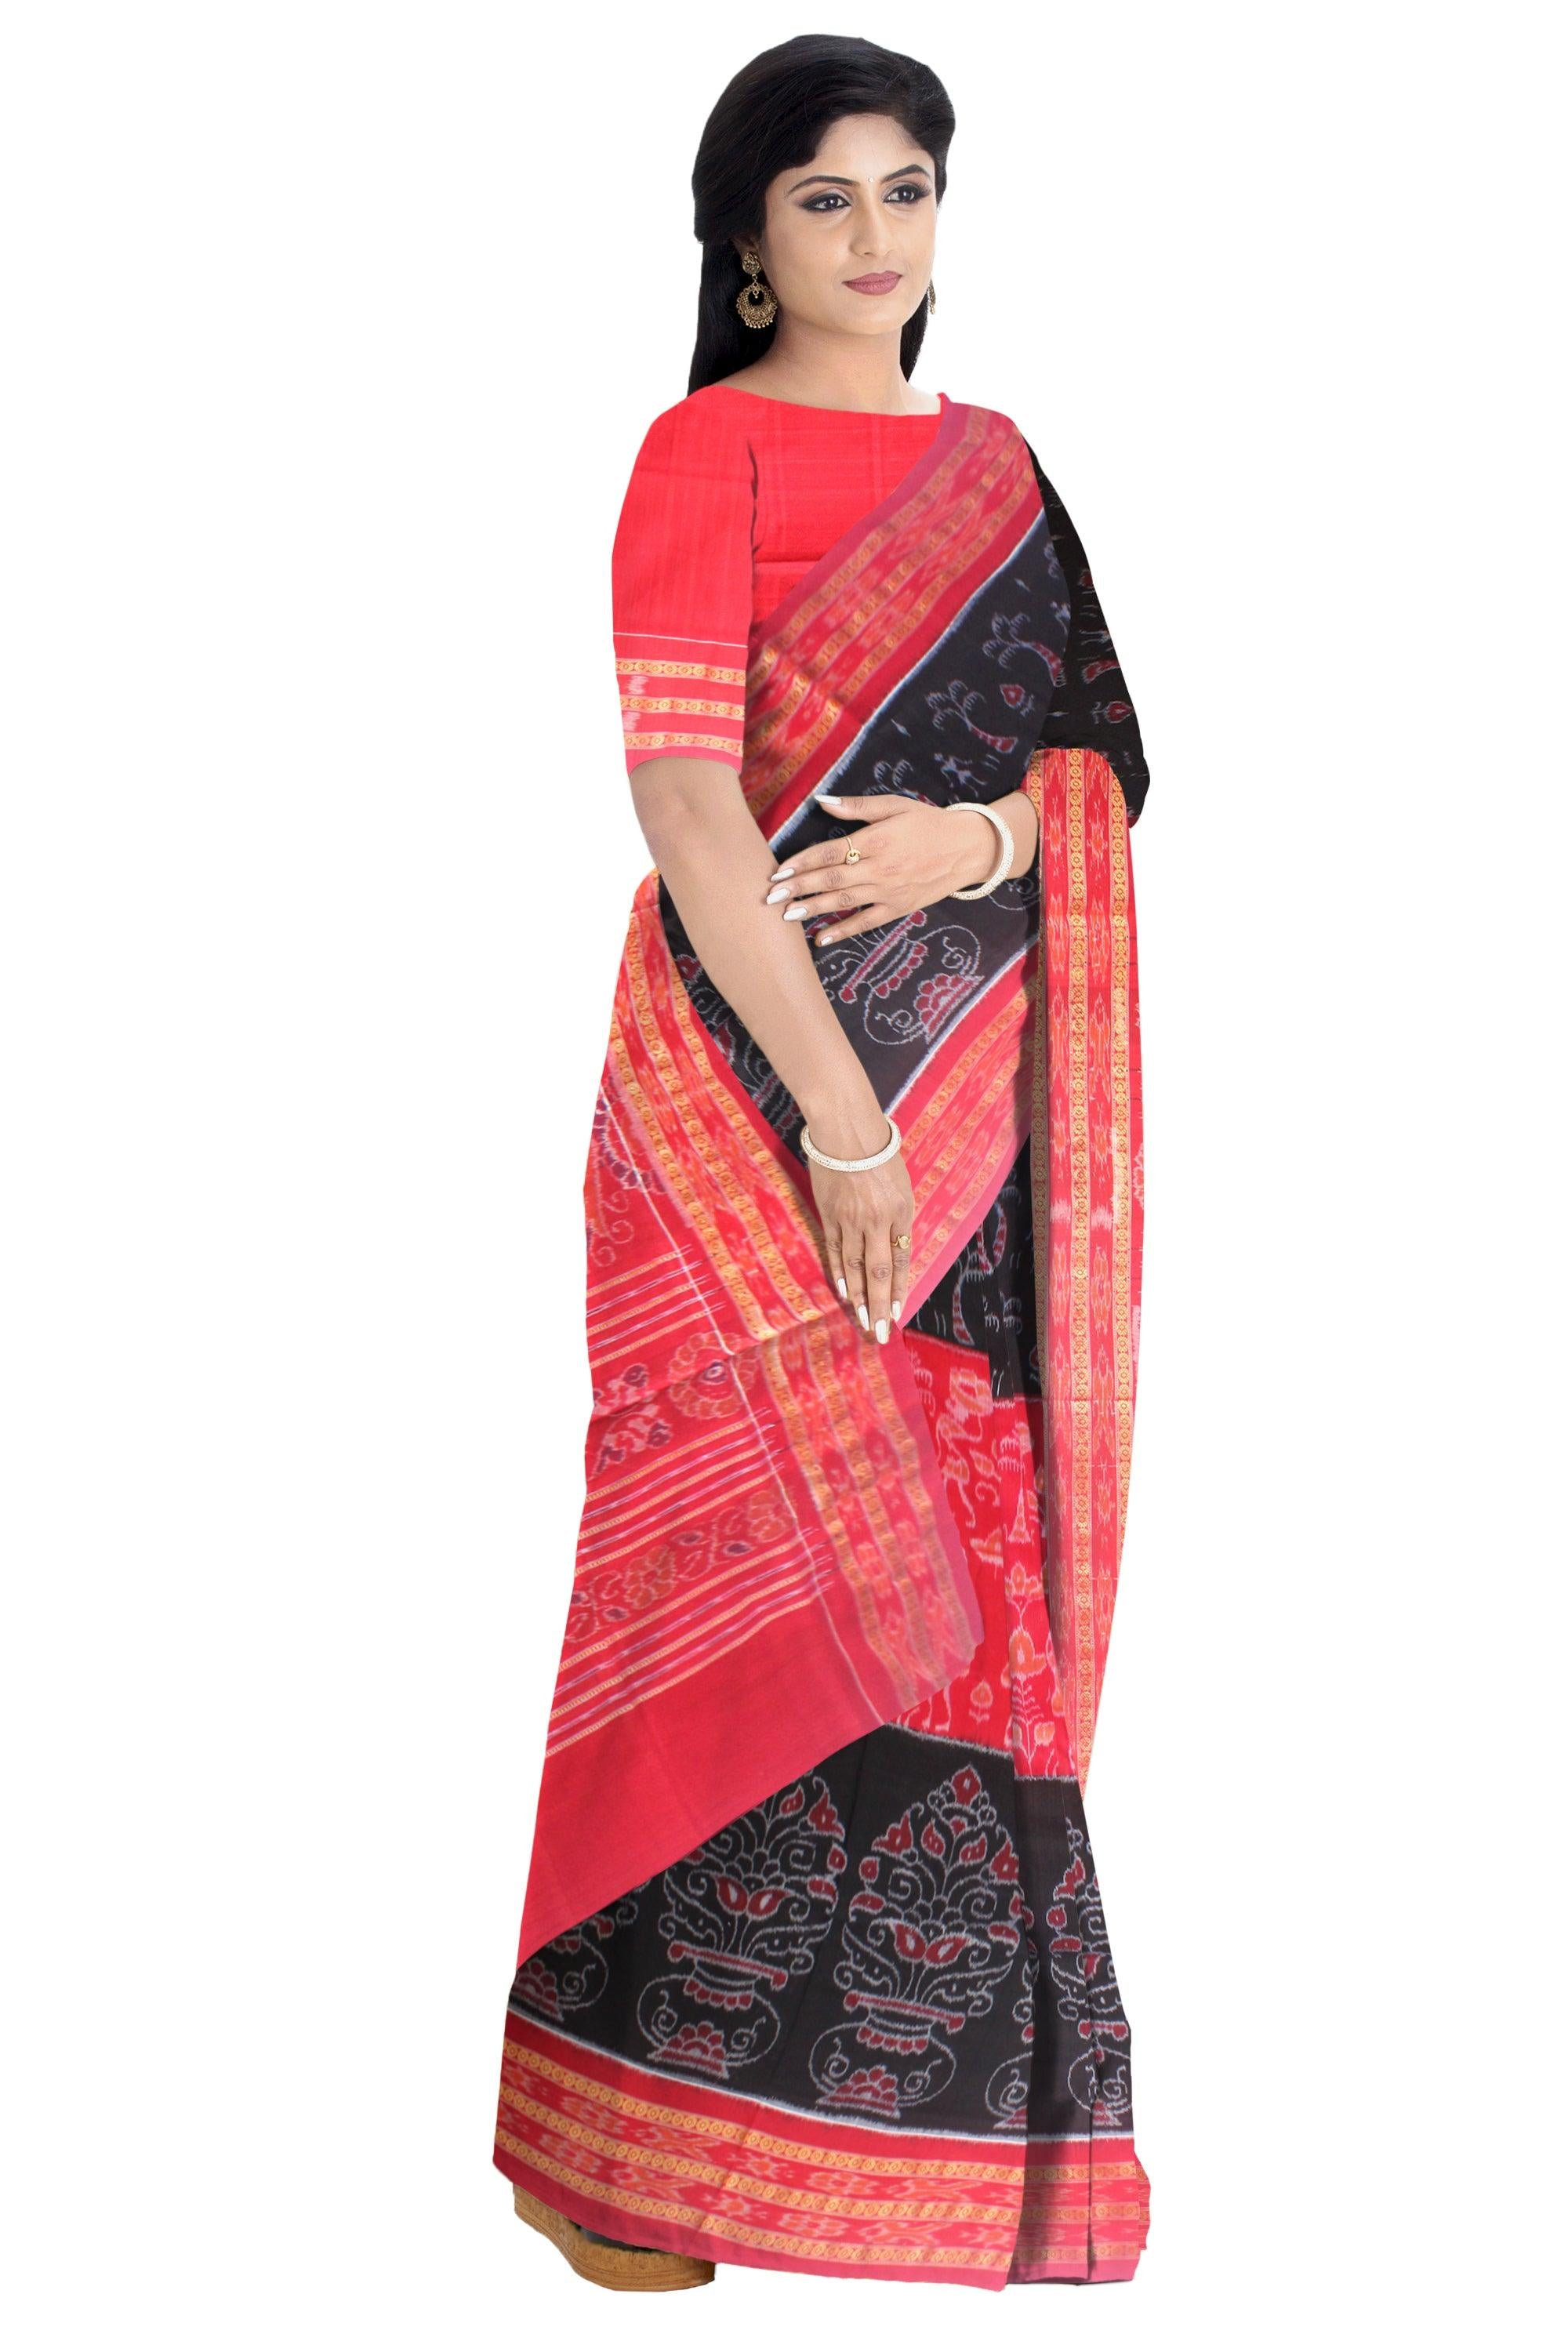 NEW COLECTION  TERRACOTTA BASED PURE COTTON SAREE IN BLACK AND RED COLOUR AVAILABLE WITH BLOUSE . - Koshali Arts & Crafts Enterprise